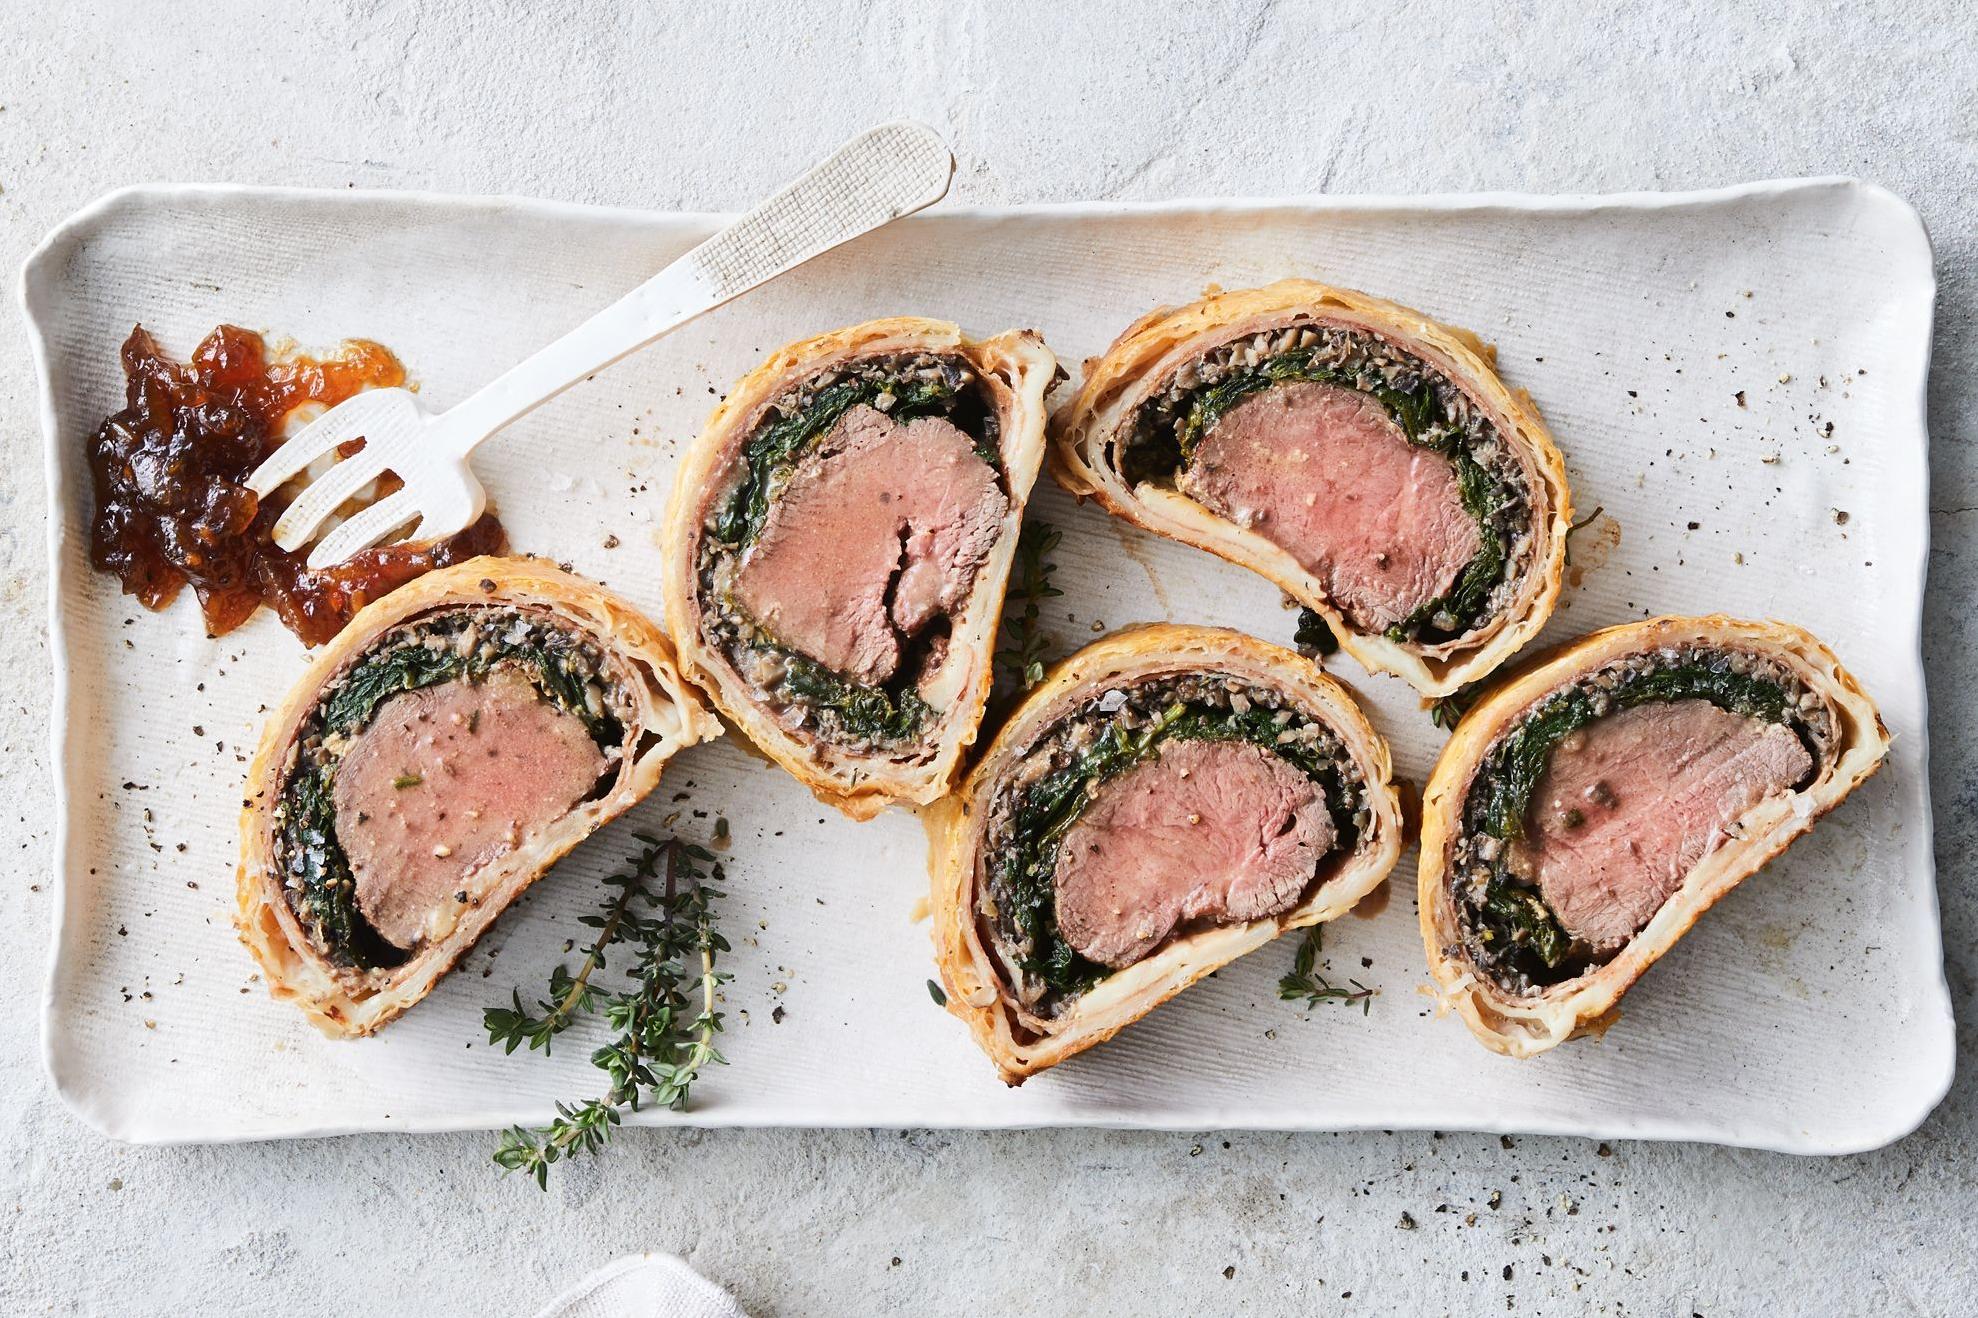  The savory aroma of perfectly cooked beef and mushrooms wrapped in a tender pastry shell.